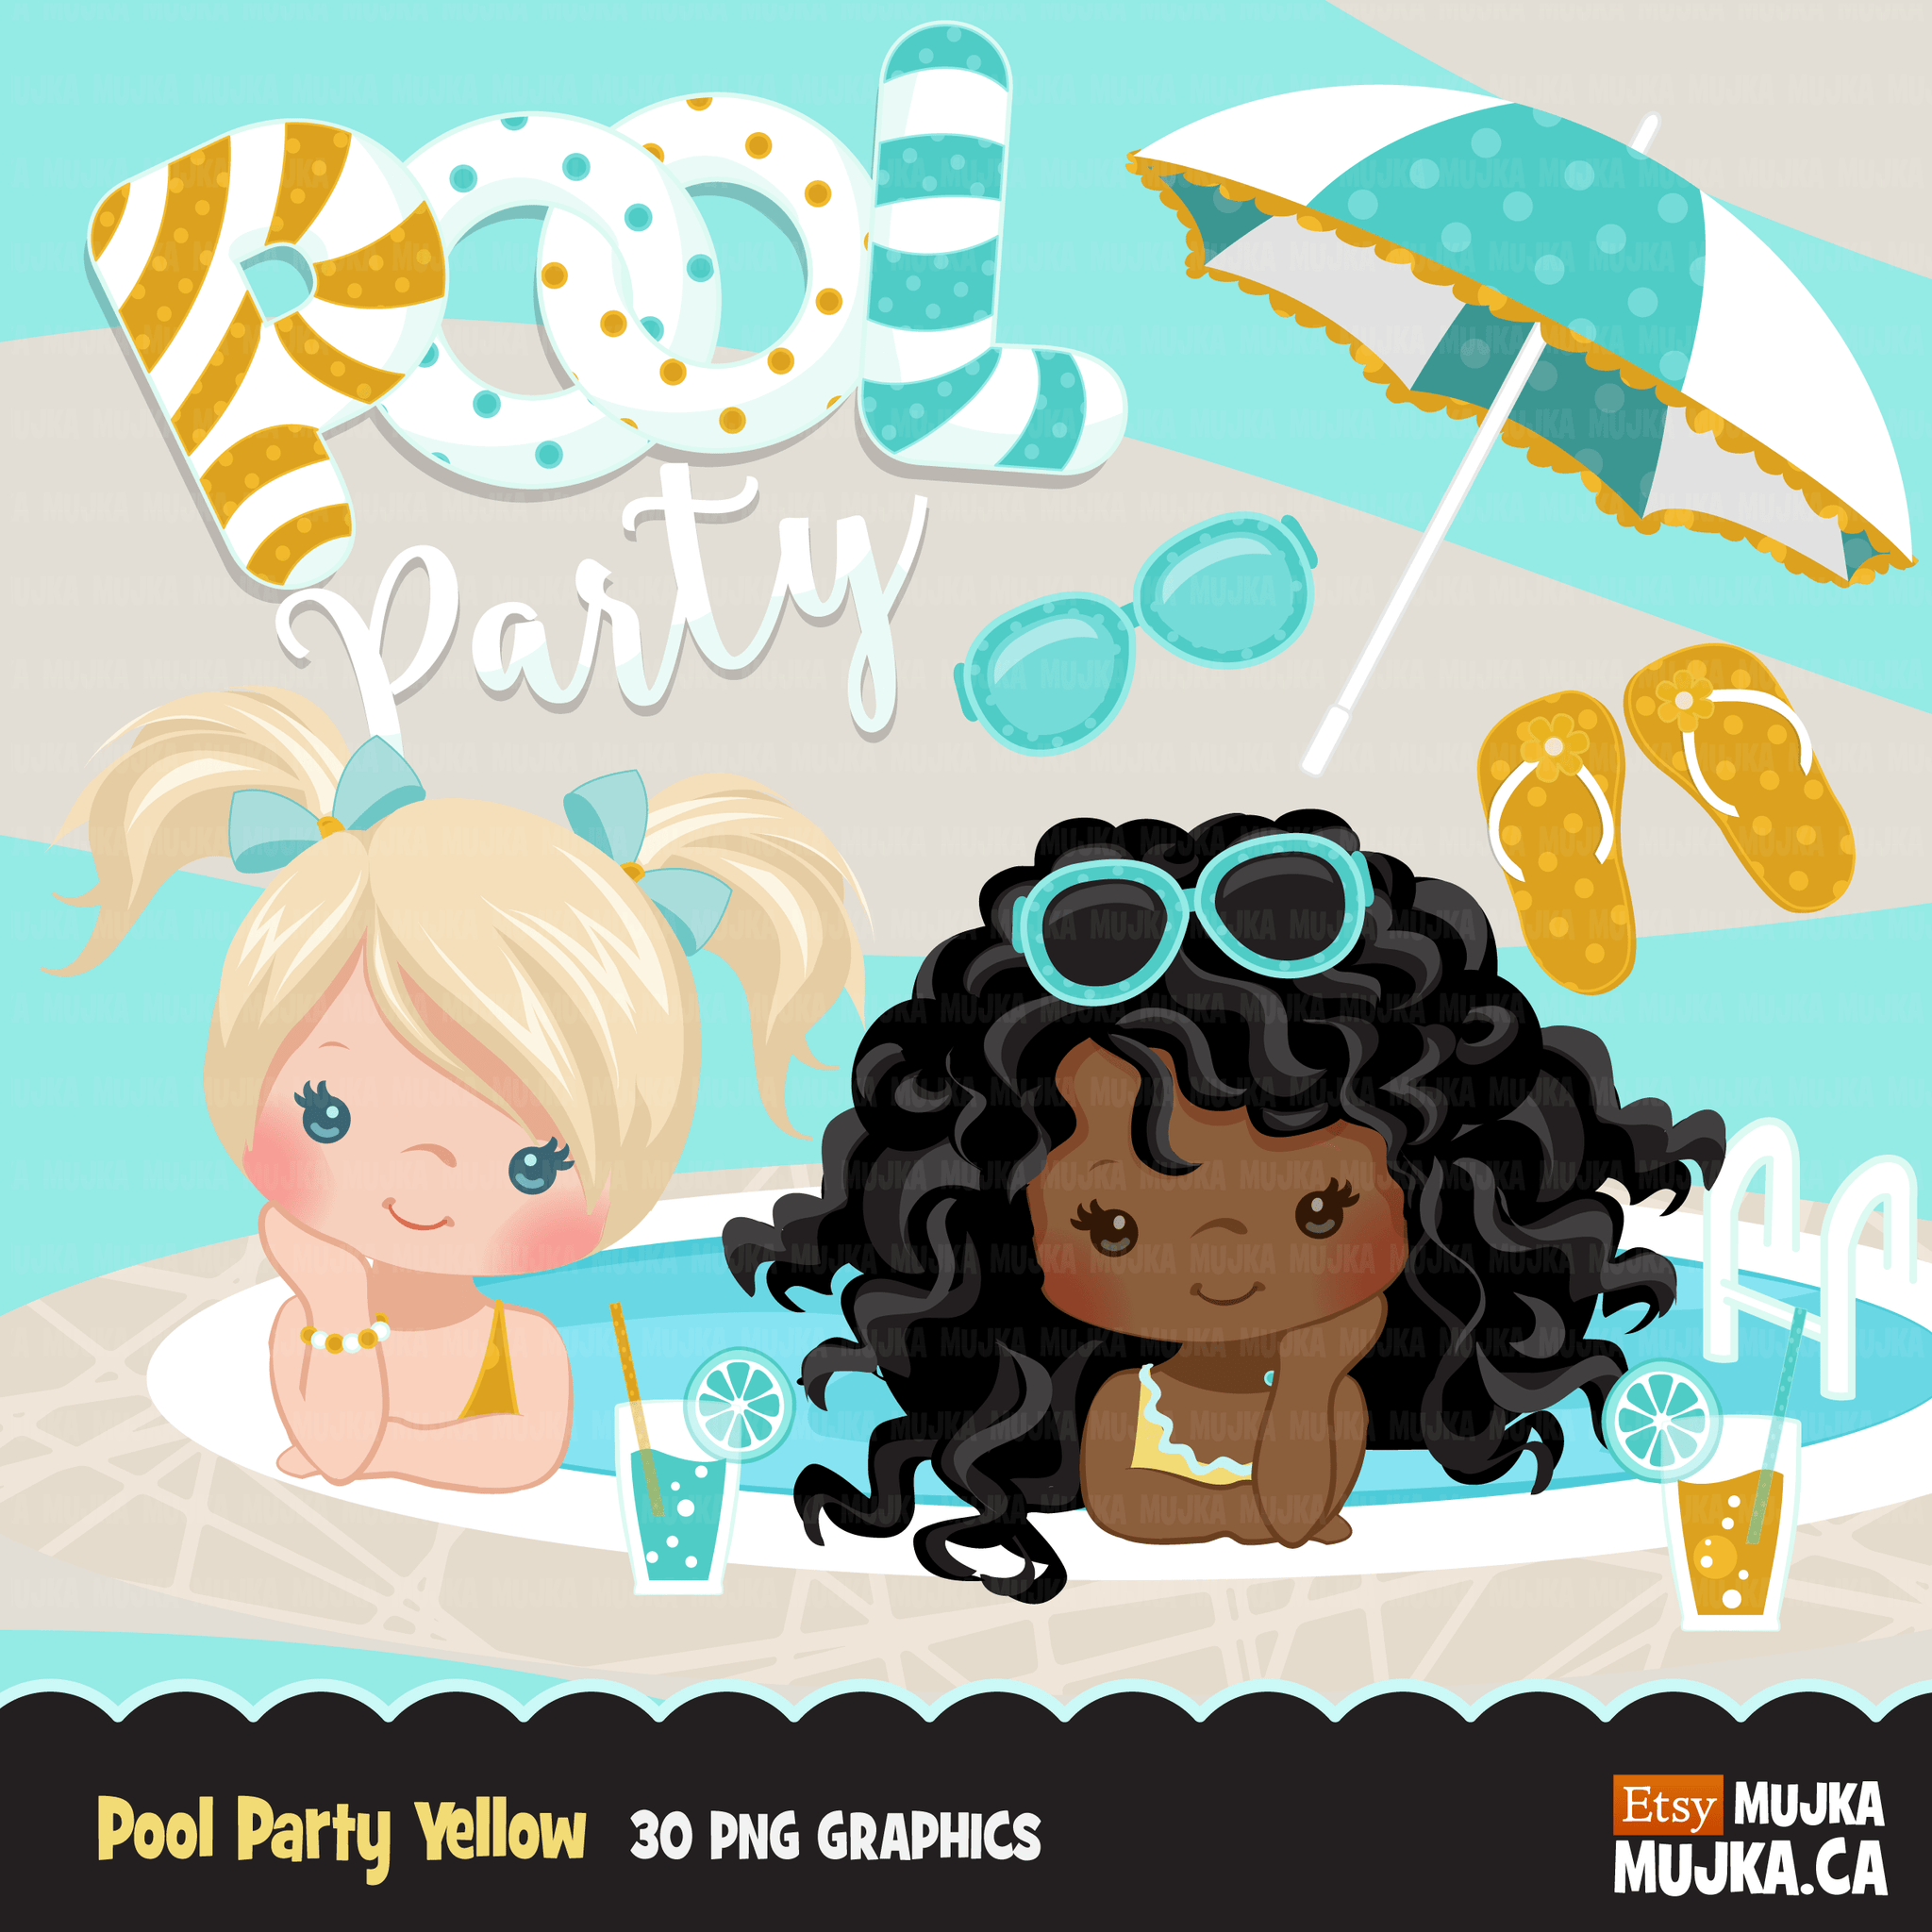 POOL PARTY - 300 dpi PNG